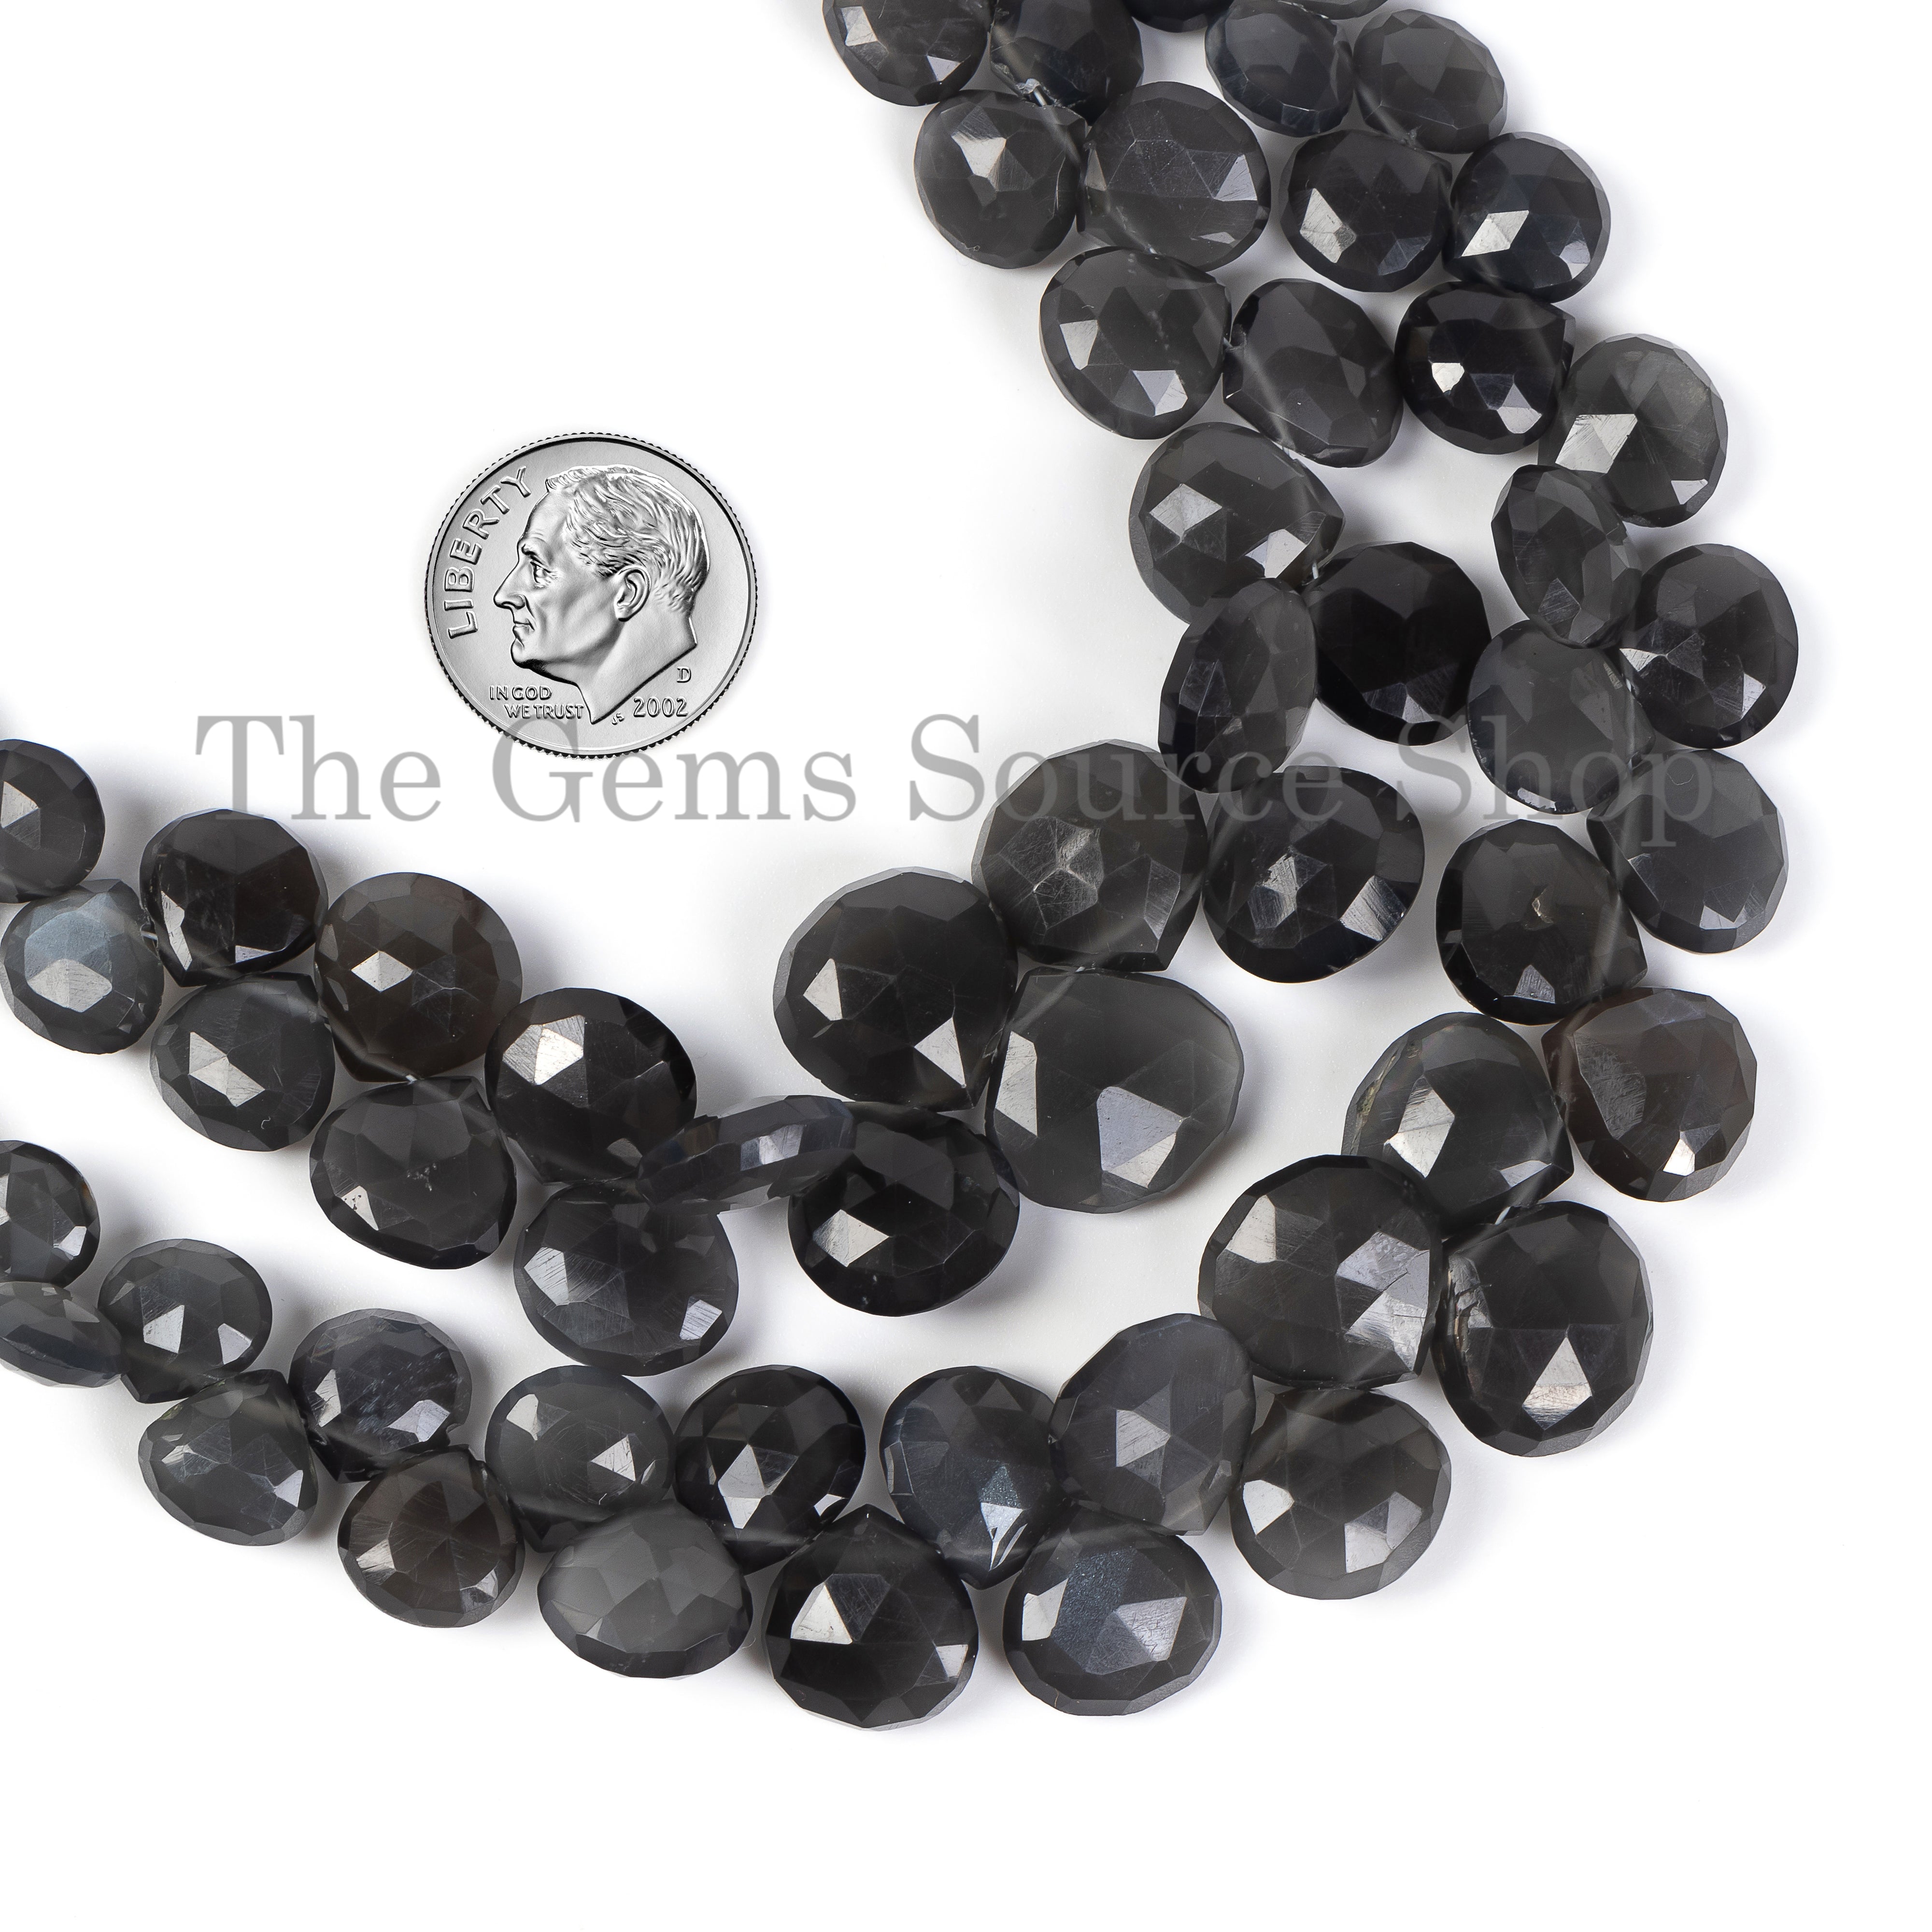 Natural Moonstone Heart Shape Beads, Gray Moonstone Faceted Gemstone Beads for Jewelry Making. TGS-5094